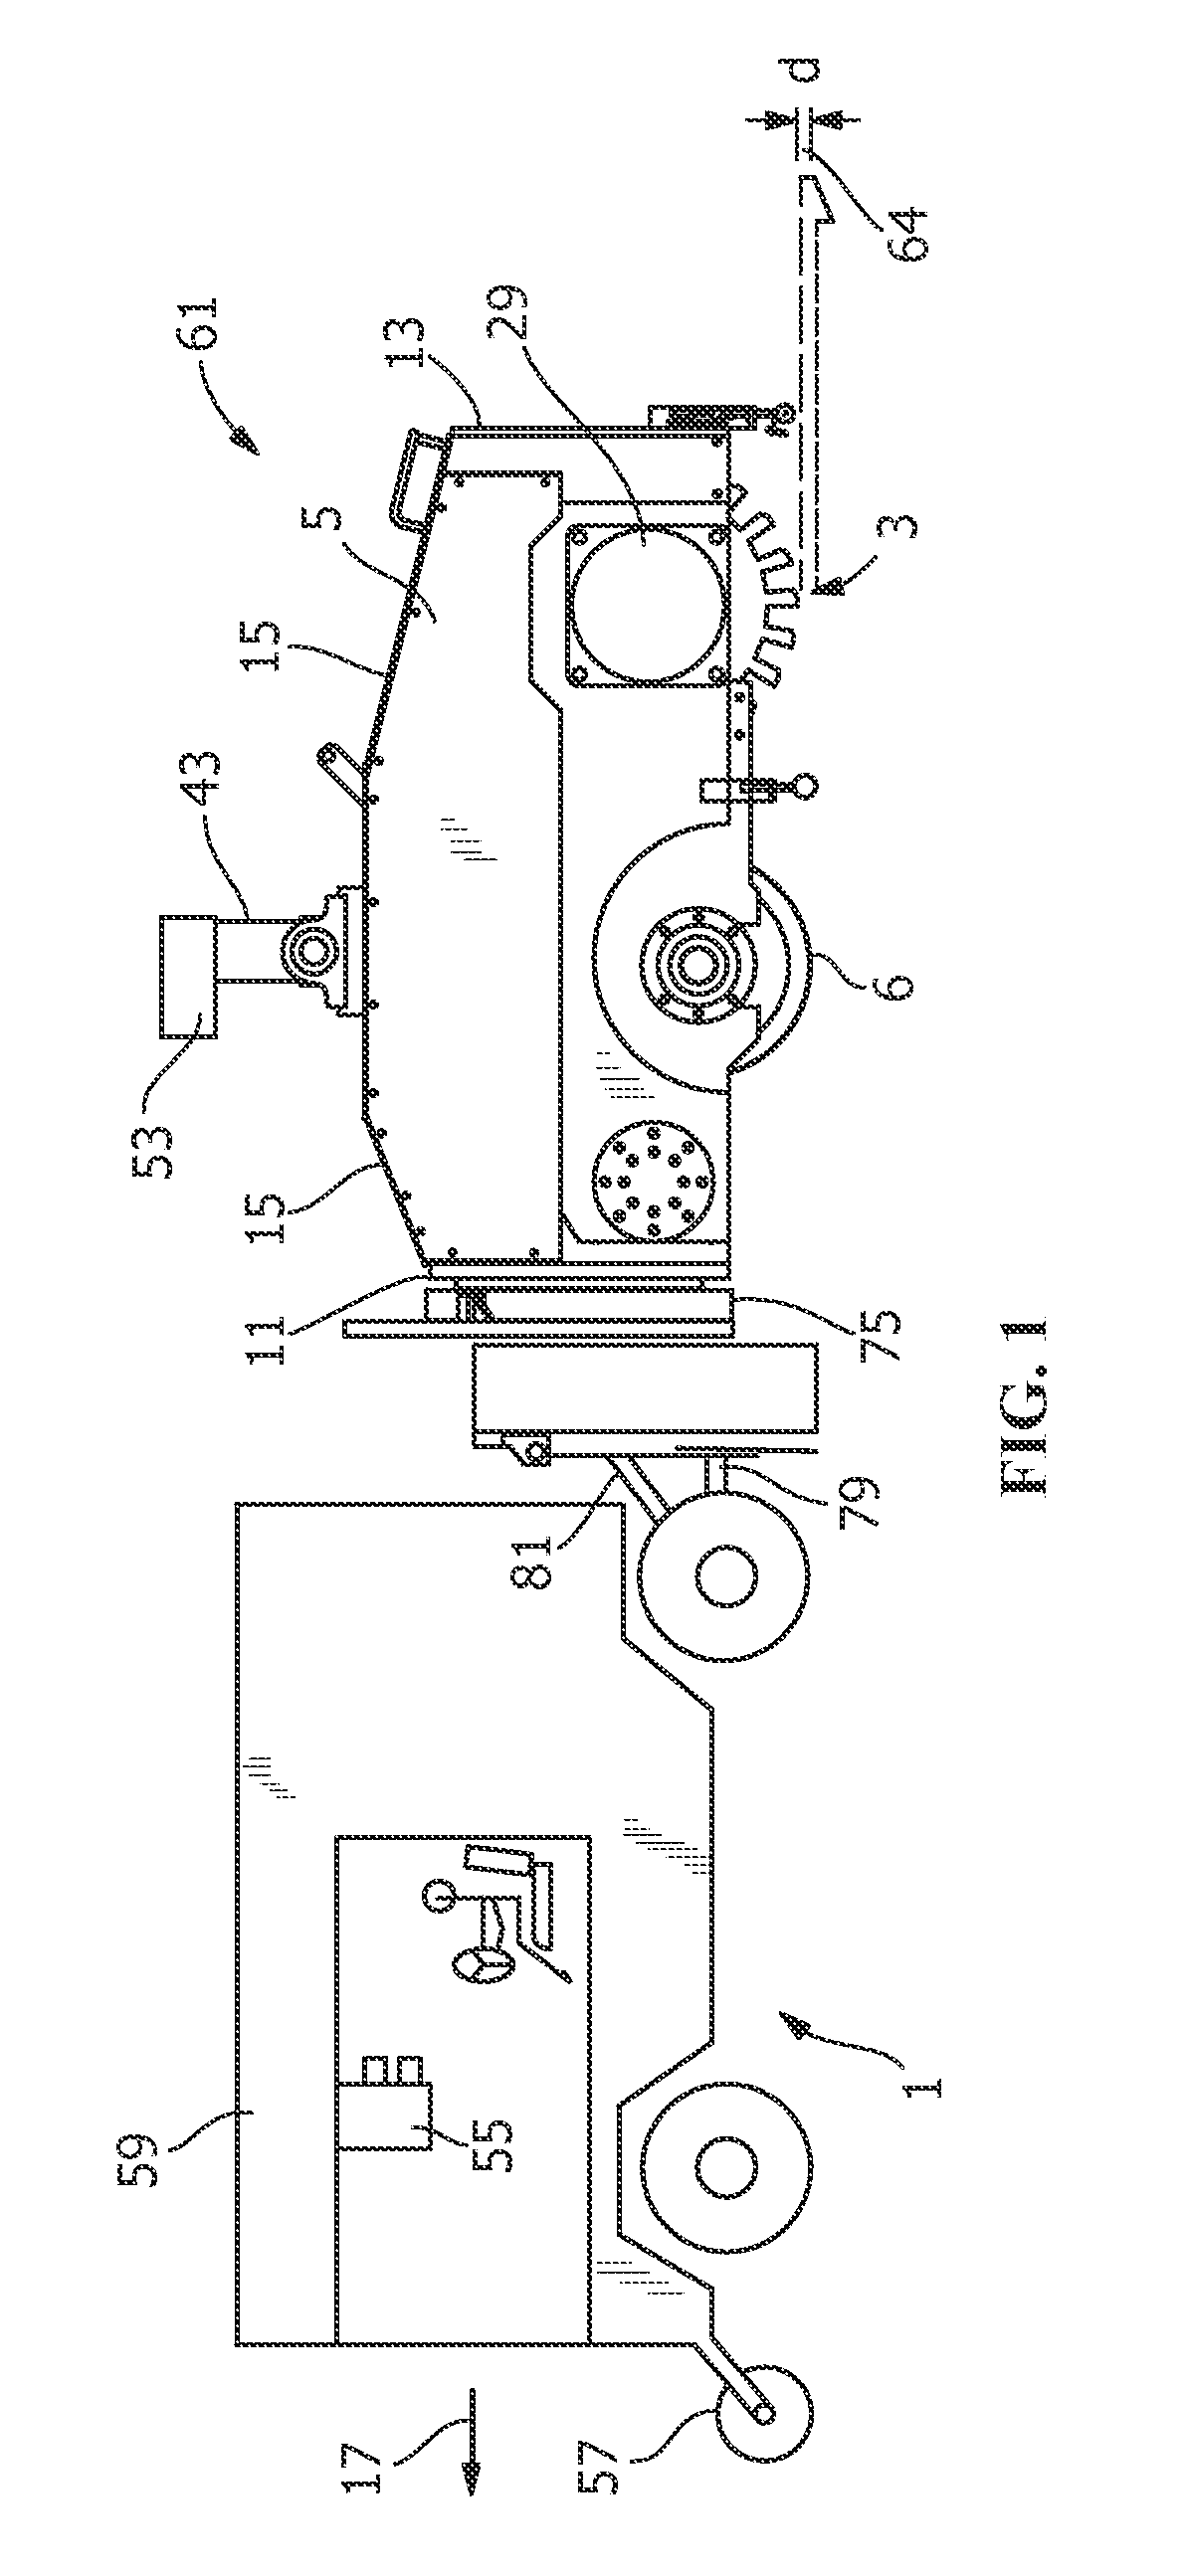 Cutting tool, mounting bracket, and rotatable cutting head